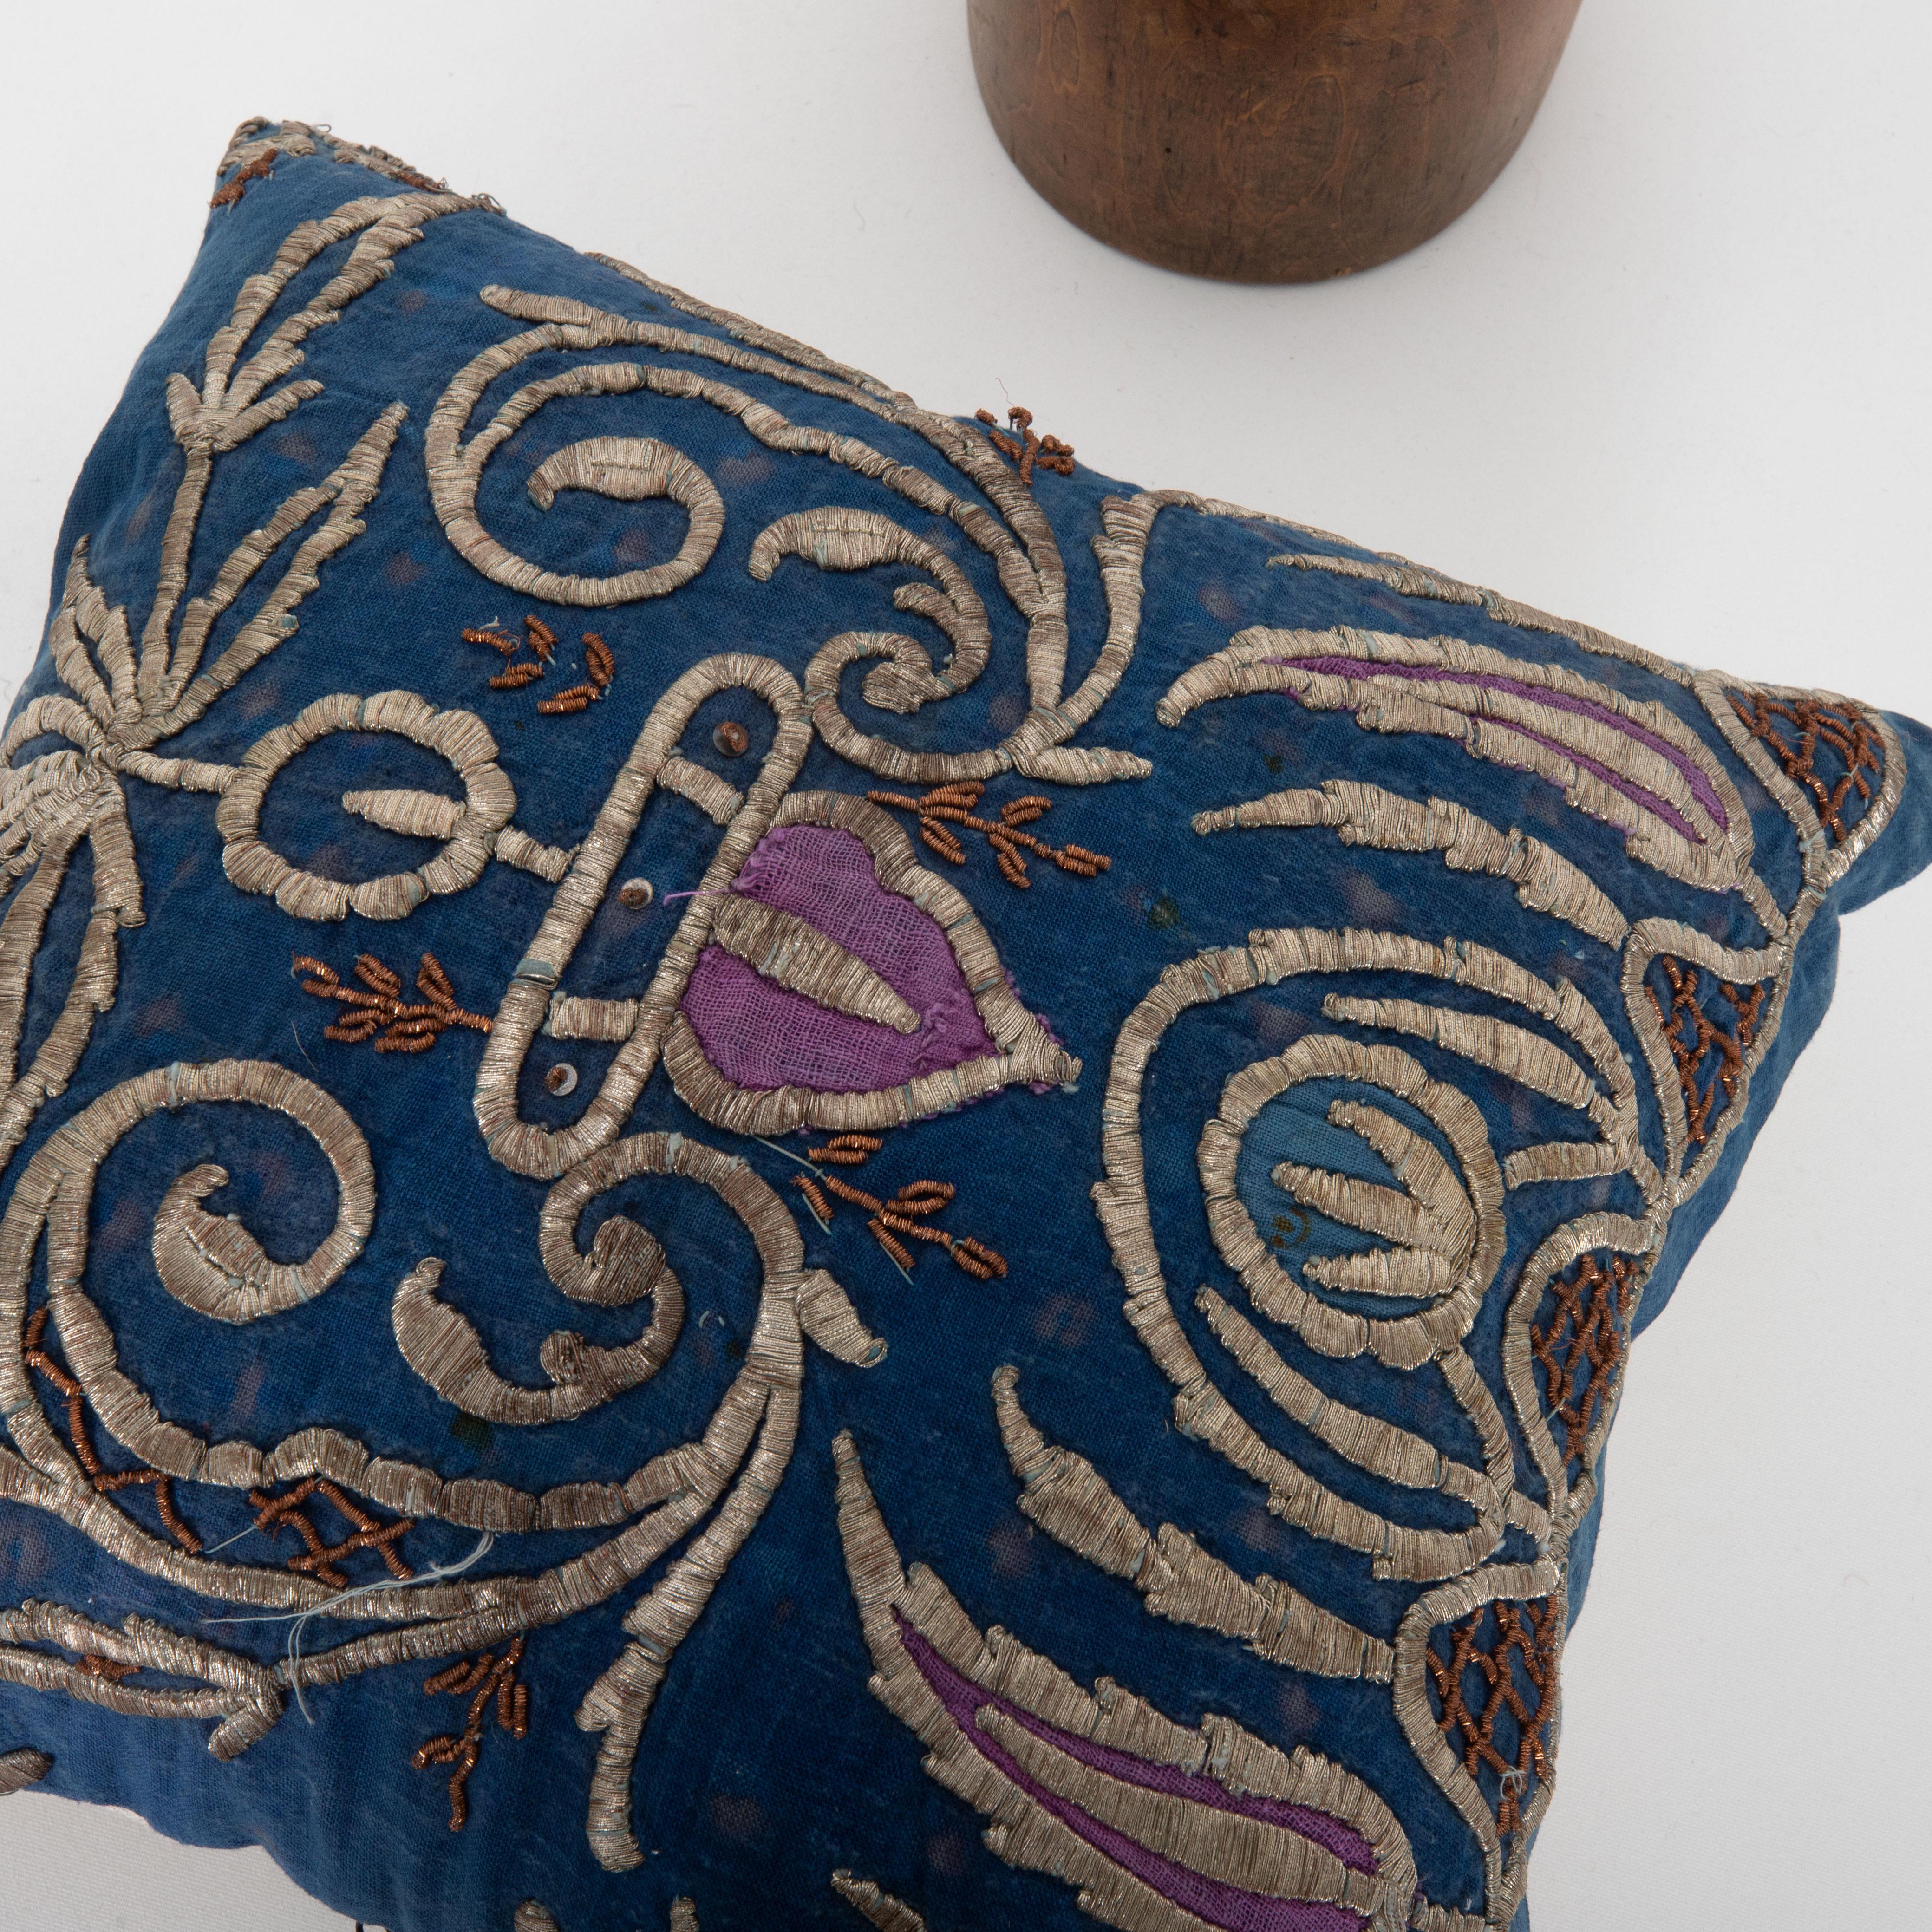 Embroidered Pillow Case Made From an E 20th C. Ottoman Sarma Panel